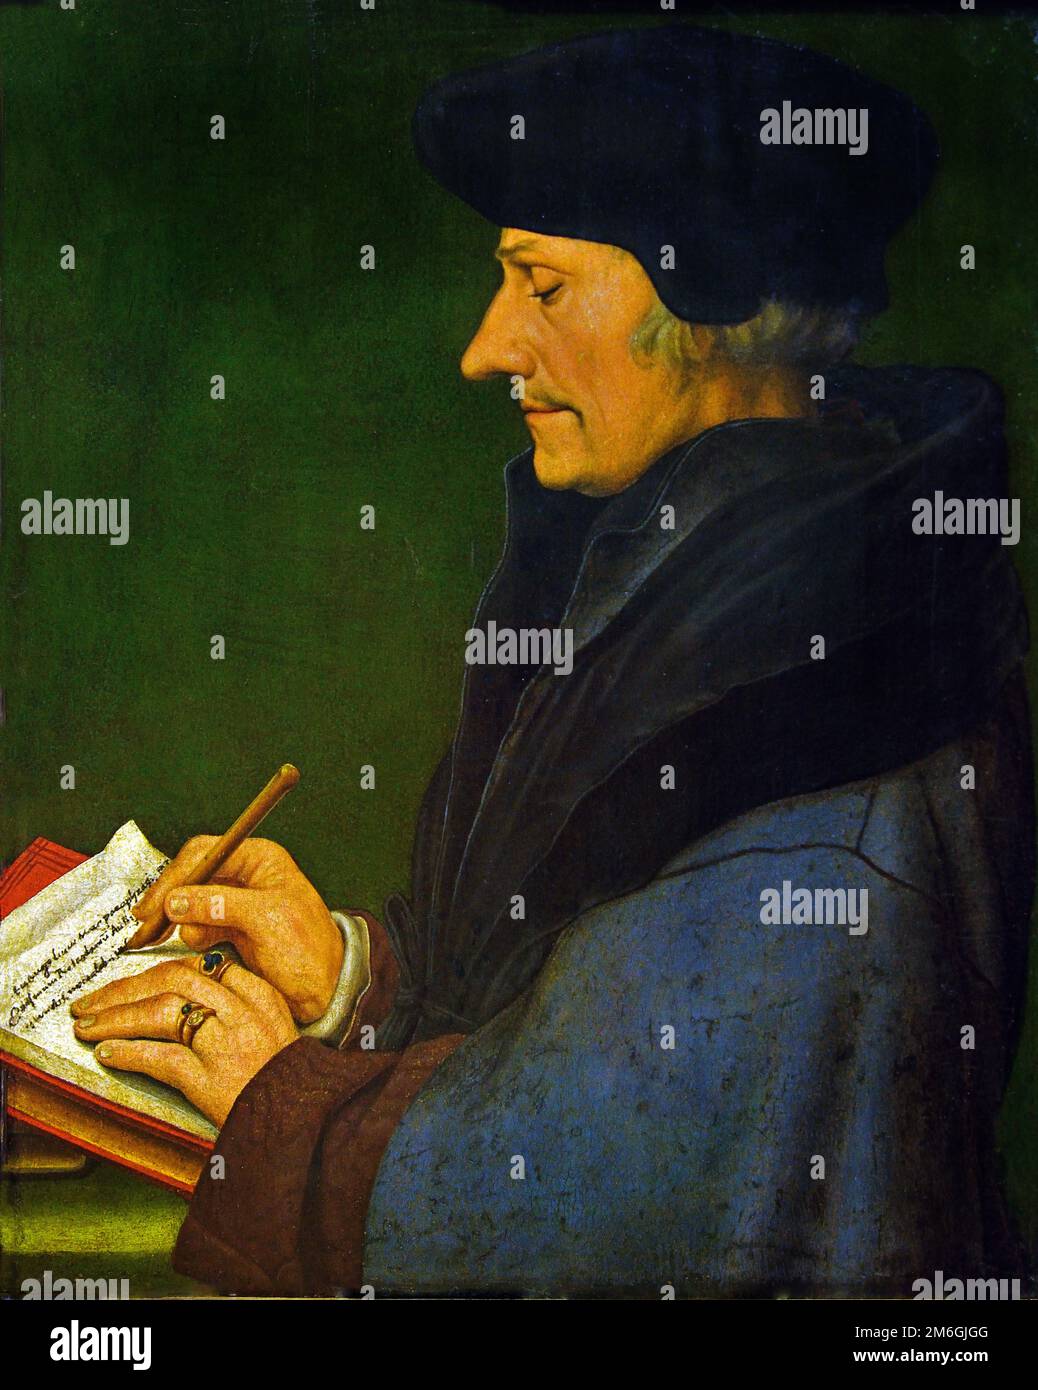 Erasmus of Rotterdam Writing, 1523 by Hans Holbein (the Younger) 1497-1543, German Germany ( Desiderius, Erasmus , Dutch philosopher ,Catholic theologian ,who is considered one of the greatest scholars,, scholar of the northern Renaissance, Europe ) Stock Photo